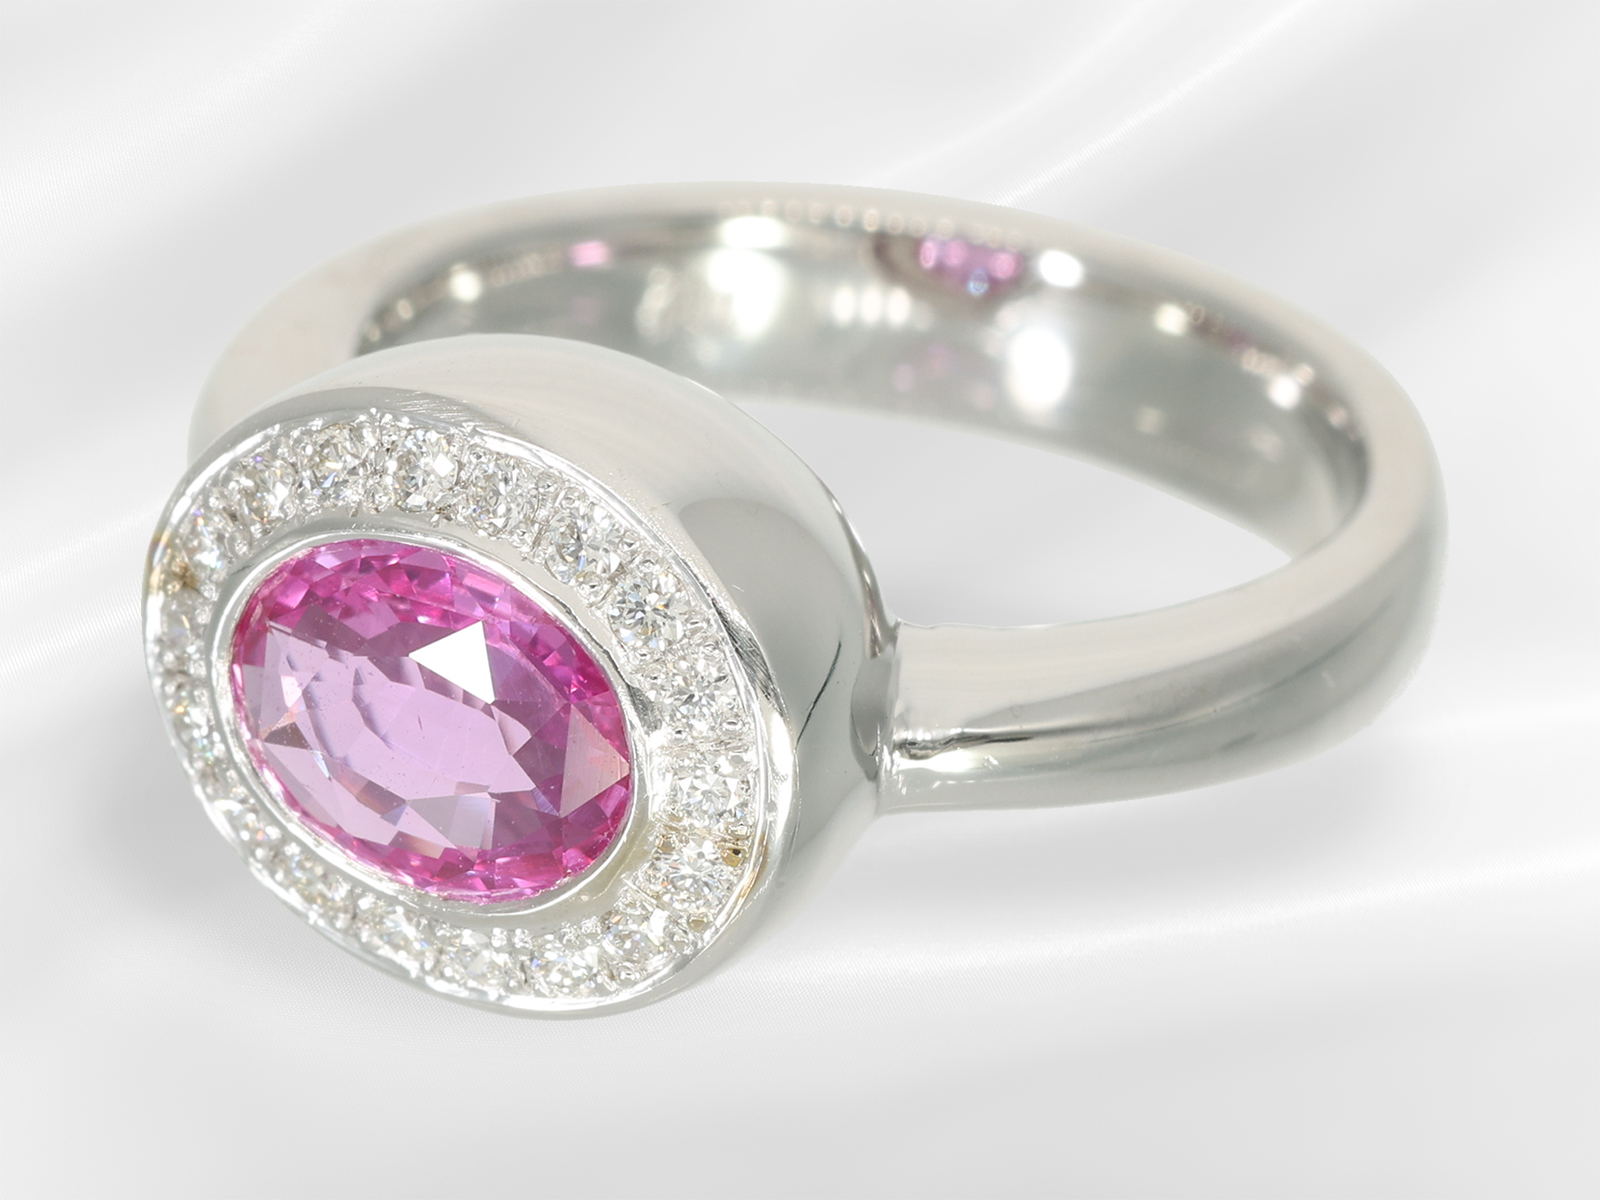 High-quality and unworn gold jewellery ring with brilliant-cut diamond/ruby setting, beautiful ruby  - Image 3 of 6